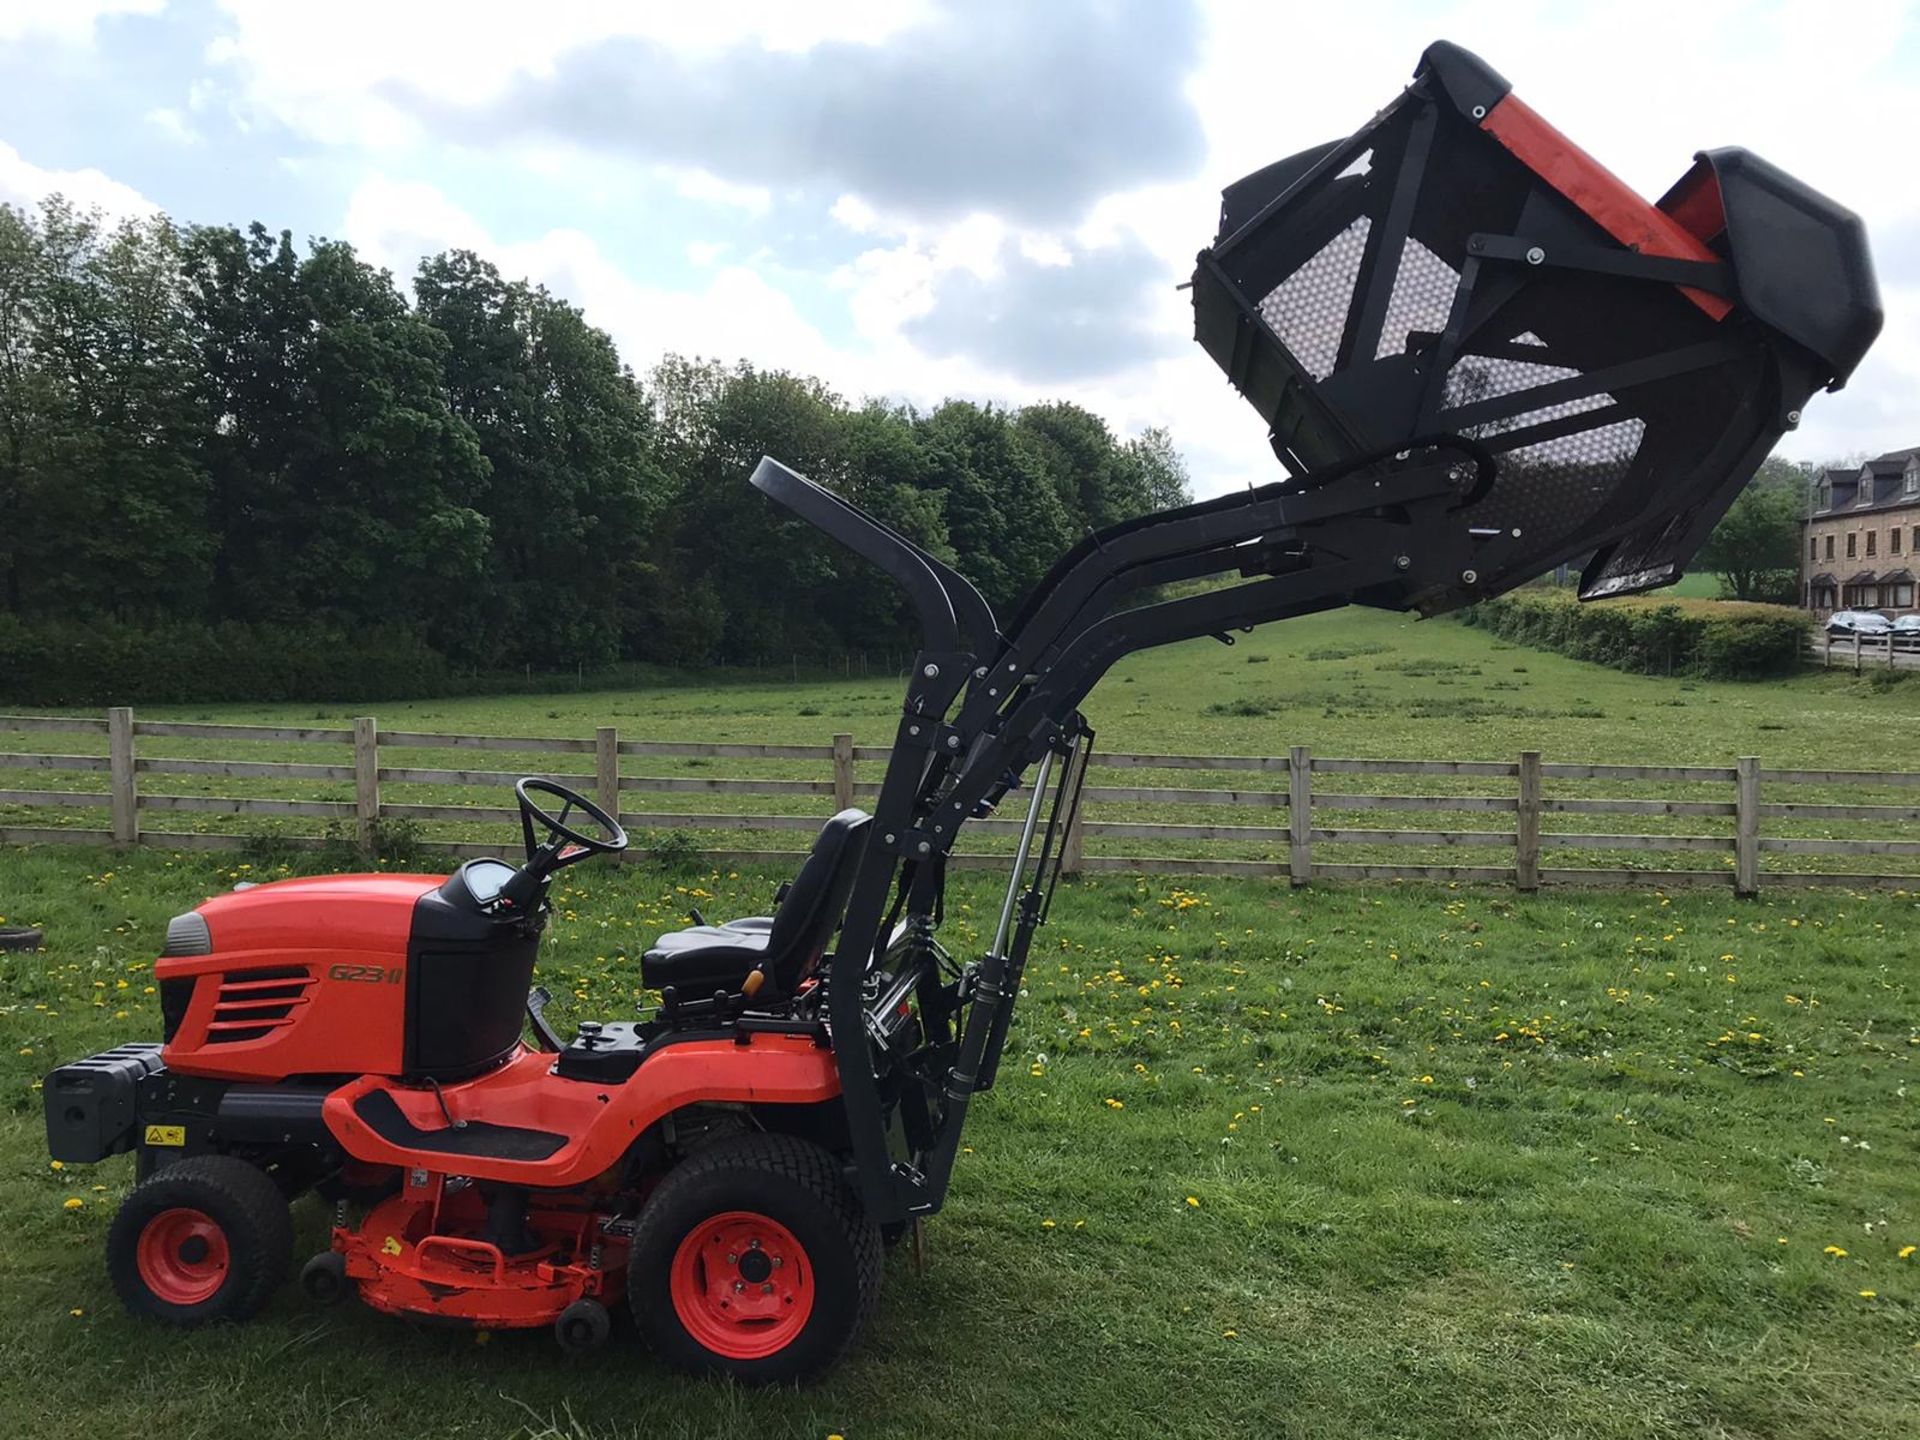 KUBOTA G23-11, MODEL G23-3HD RIDE ON MOWER, 48” MID MOUNTED CUTTING DECK. YEAR 2015, 995 LOW HOURS - Image 6 of 13